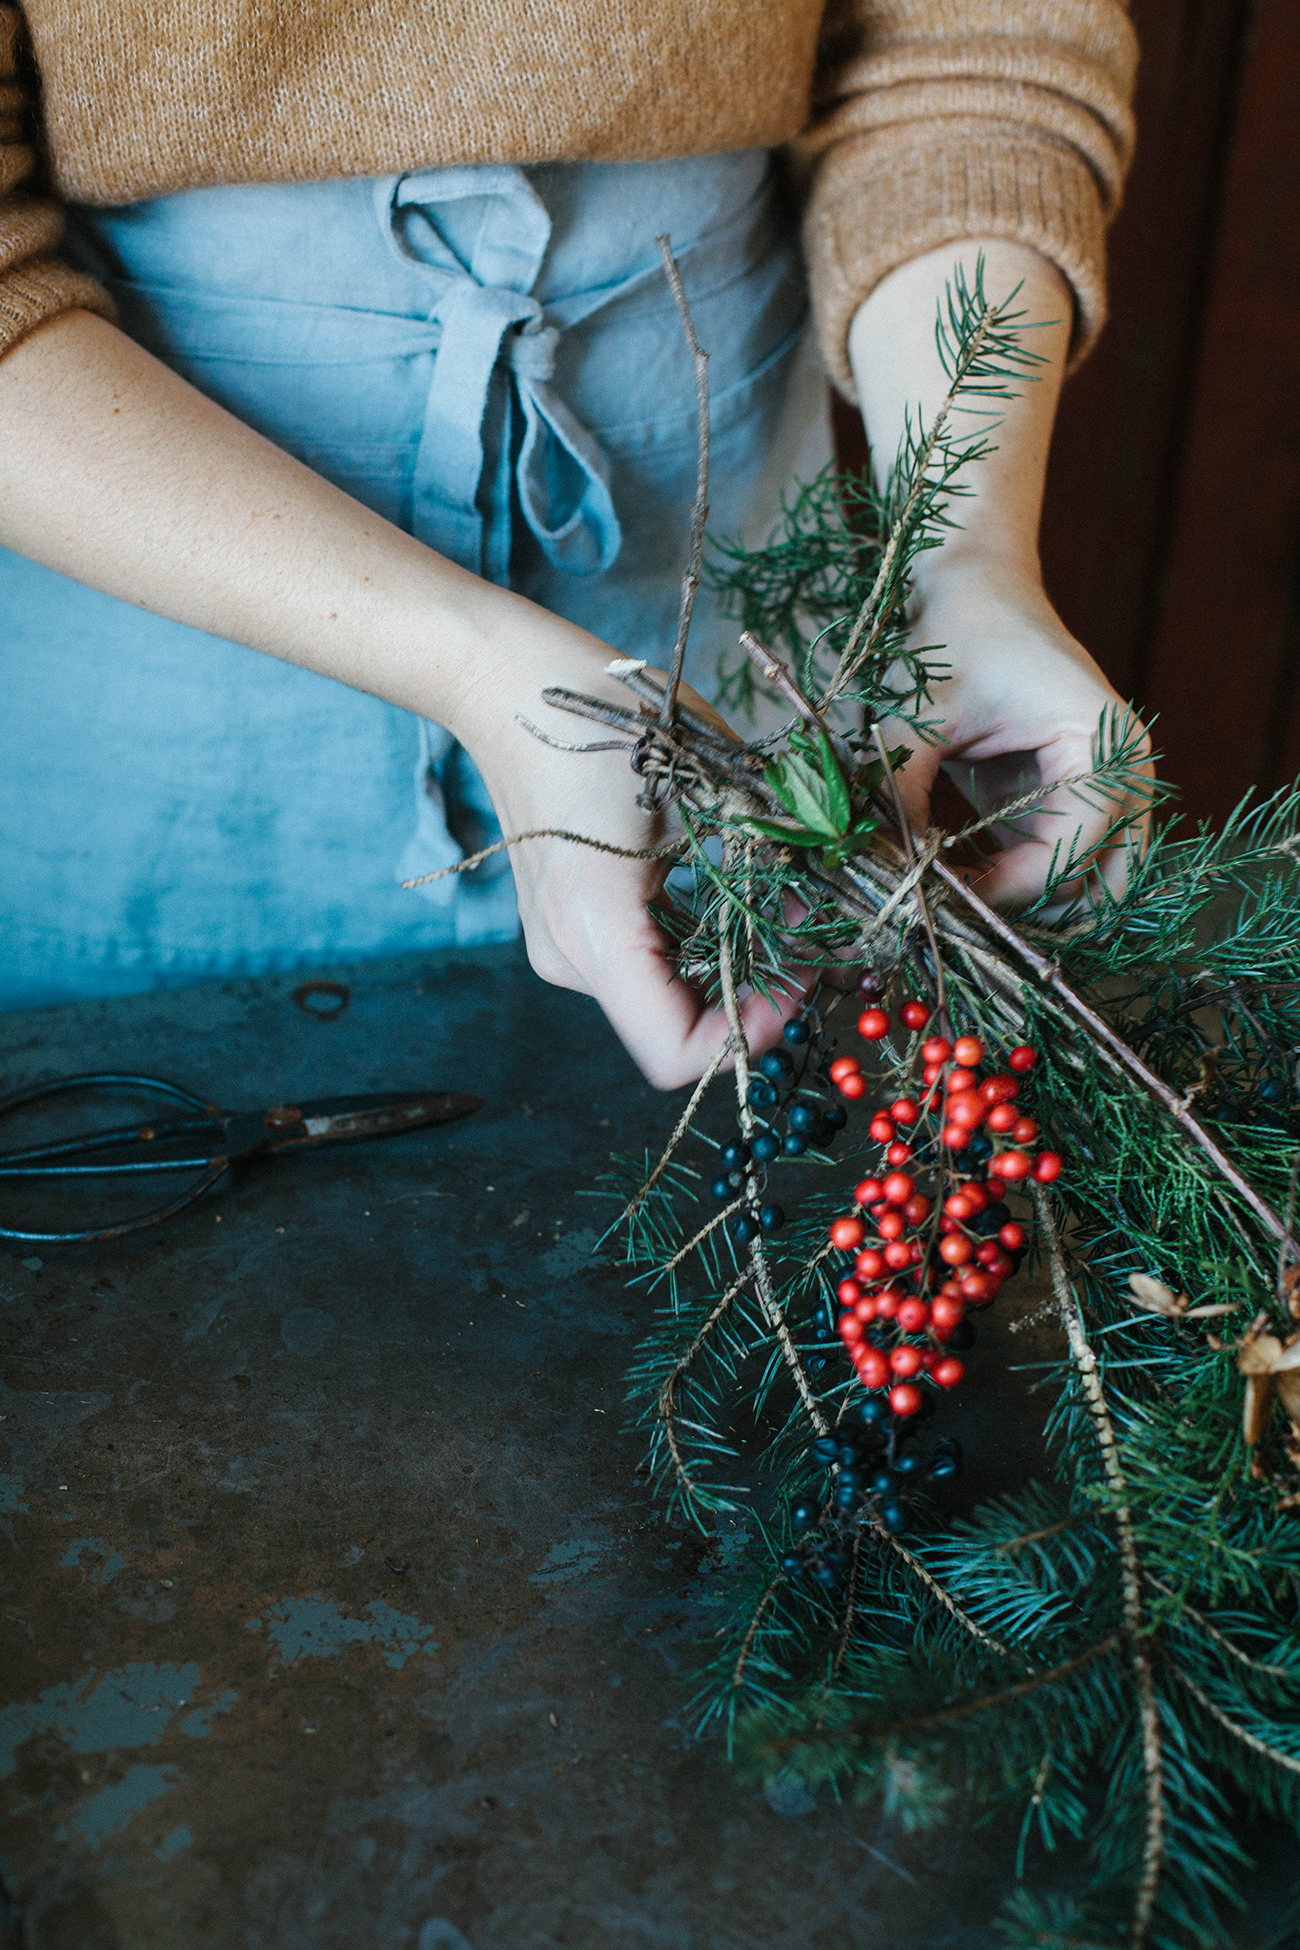 Tying together branches and berries to finish a wreath